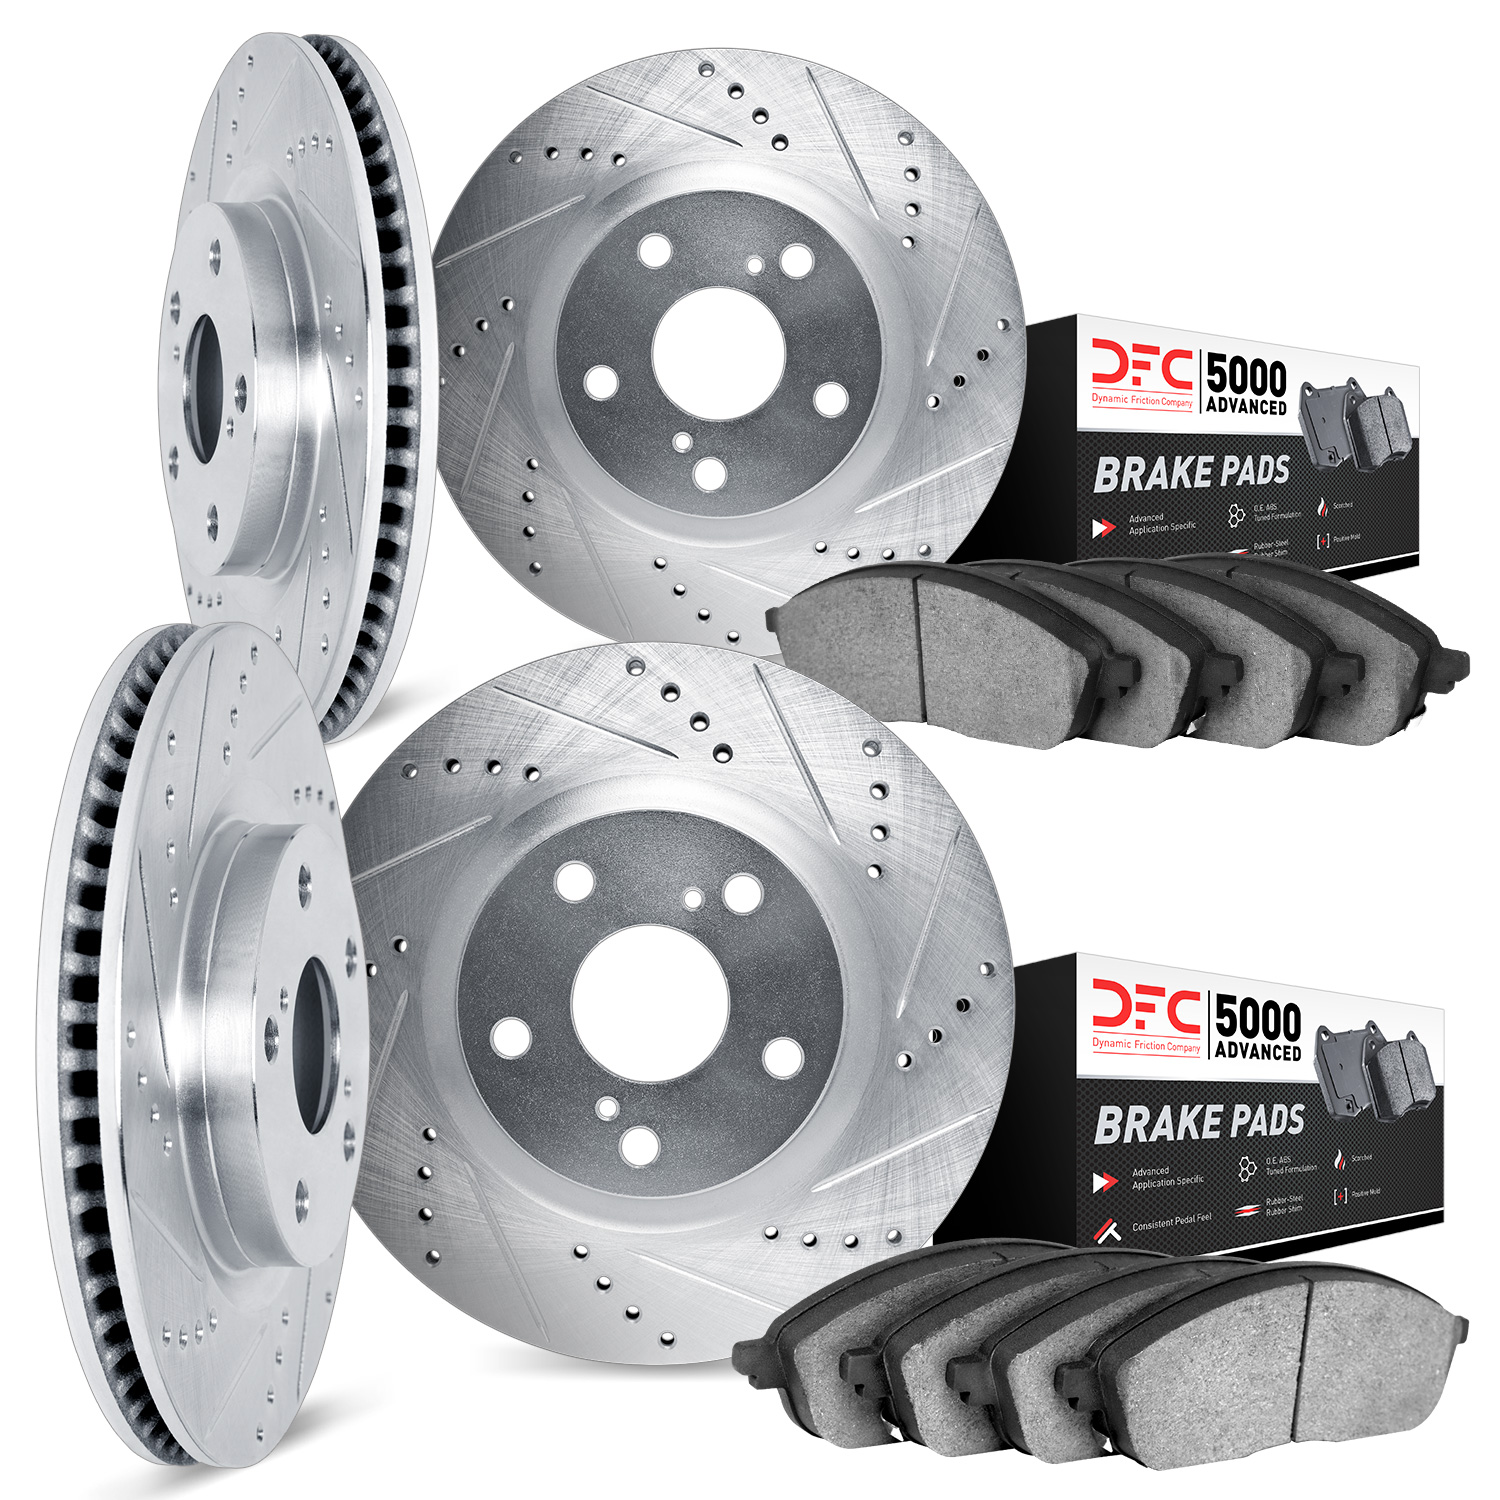 7504-46023 Drilled/Slotted Brake Rotors w/5000 Advanced Brake Pads Kit [Silver], 2008-2014 GM, Position: Front and Rear